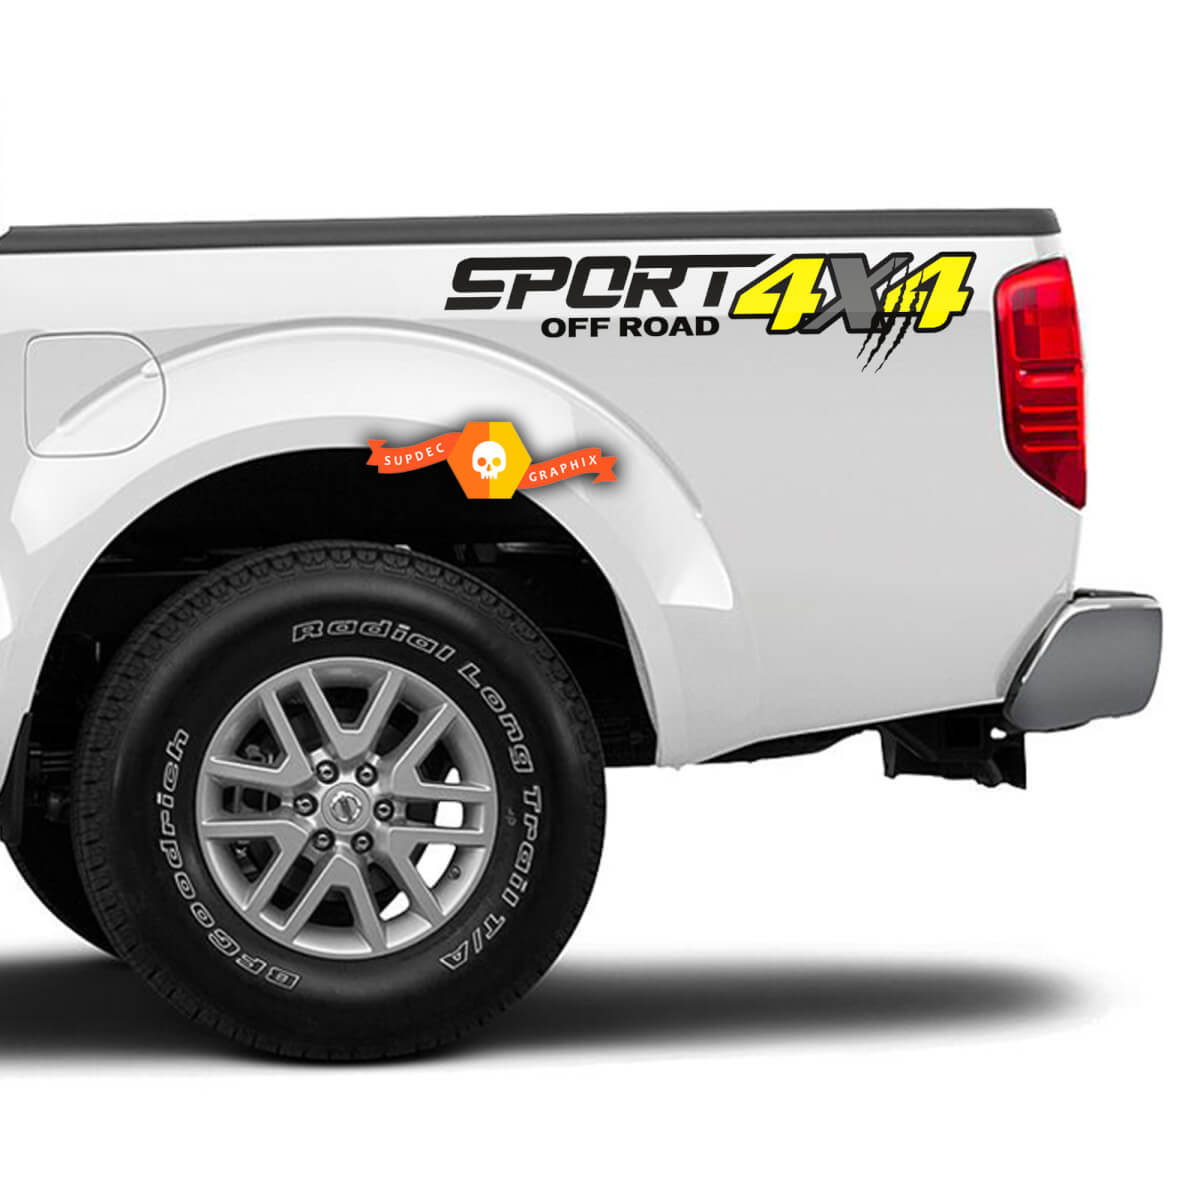 Pair  for Nissan Frontier Hummer Bronco 4X4 Off Road Sport Scratches RAM F150 Silverado Sierra Decal Sticker Kit for any Truck  or SUV